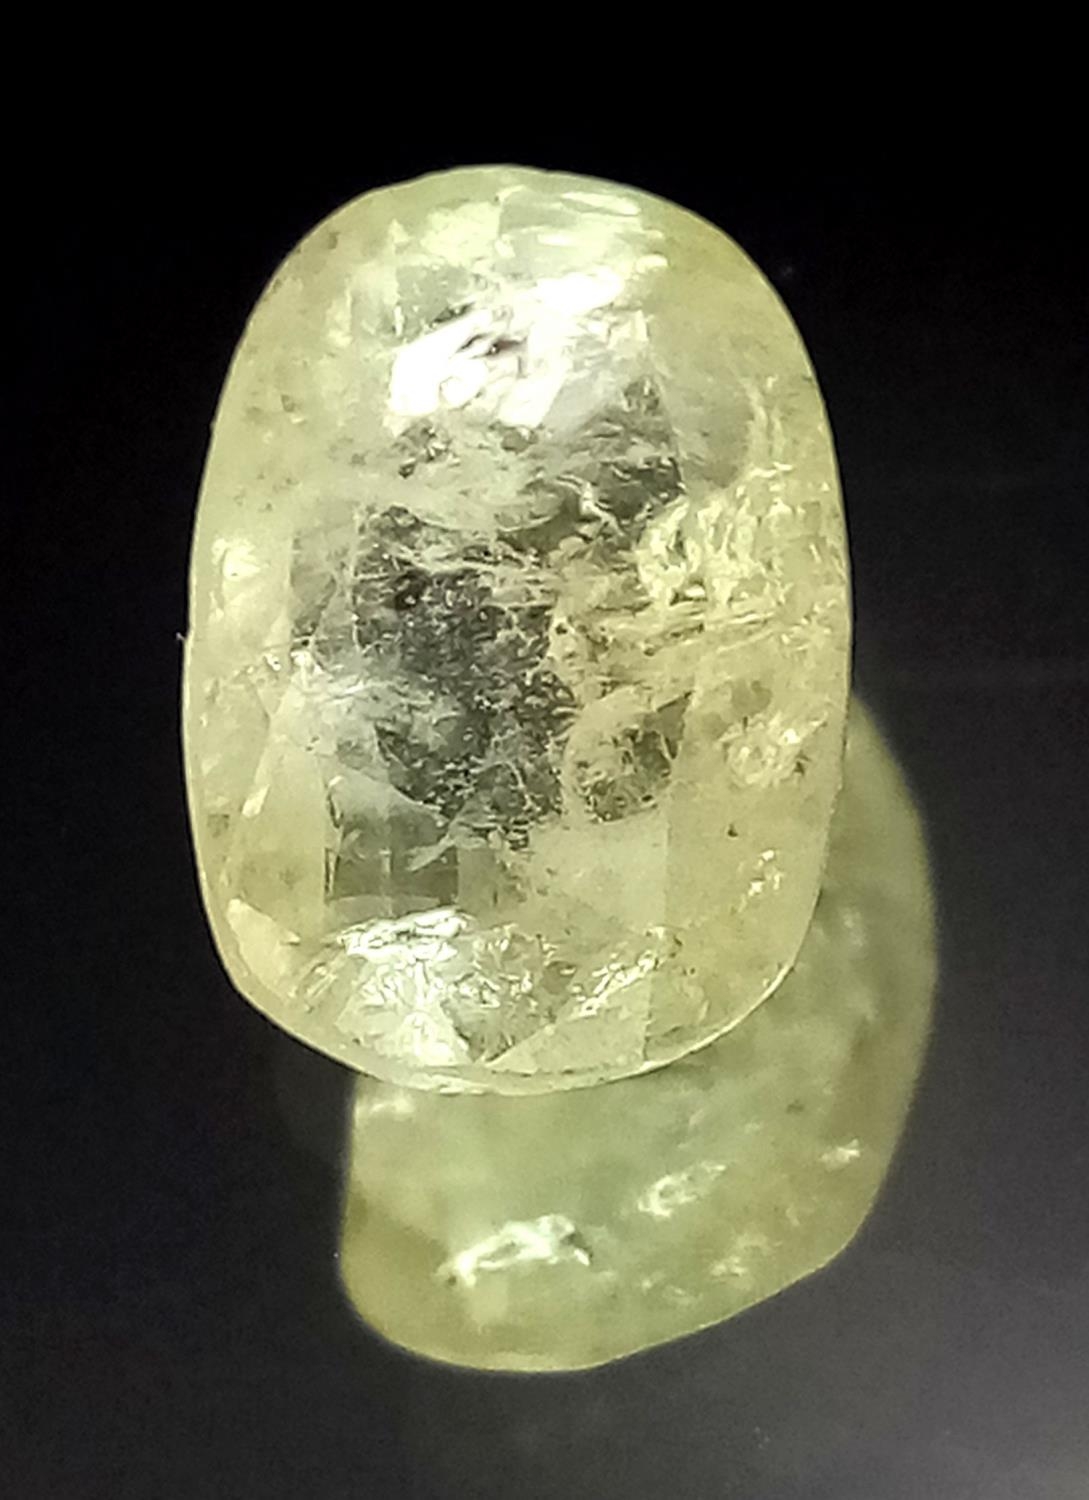 A 1.87ct Untreated Madagascar Yellow Sapphire - AIG Certified.